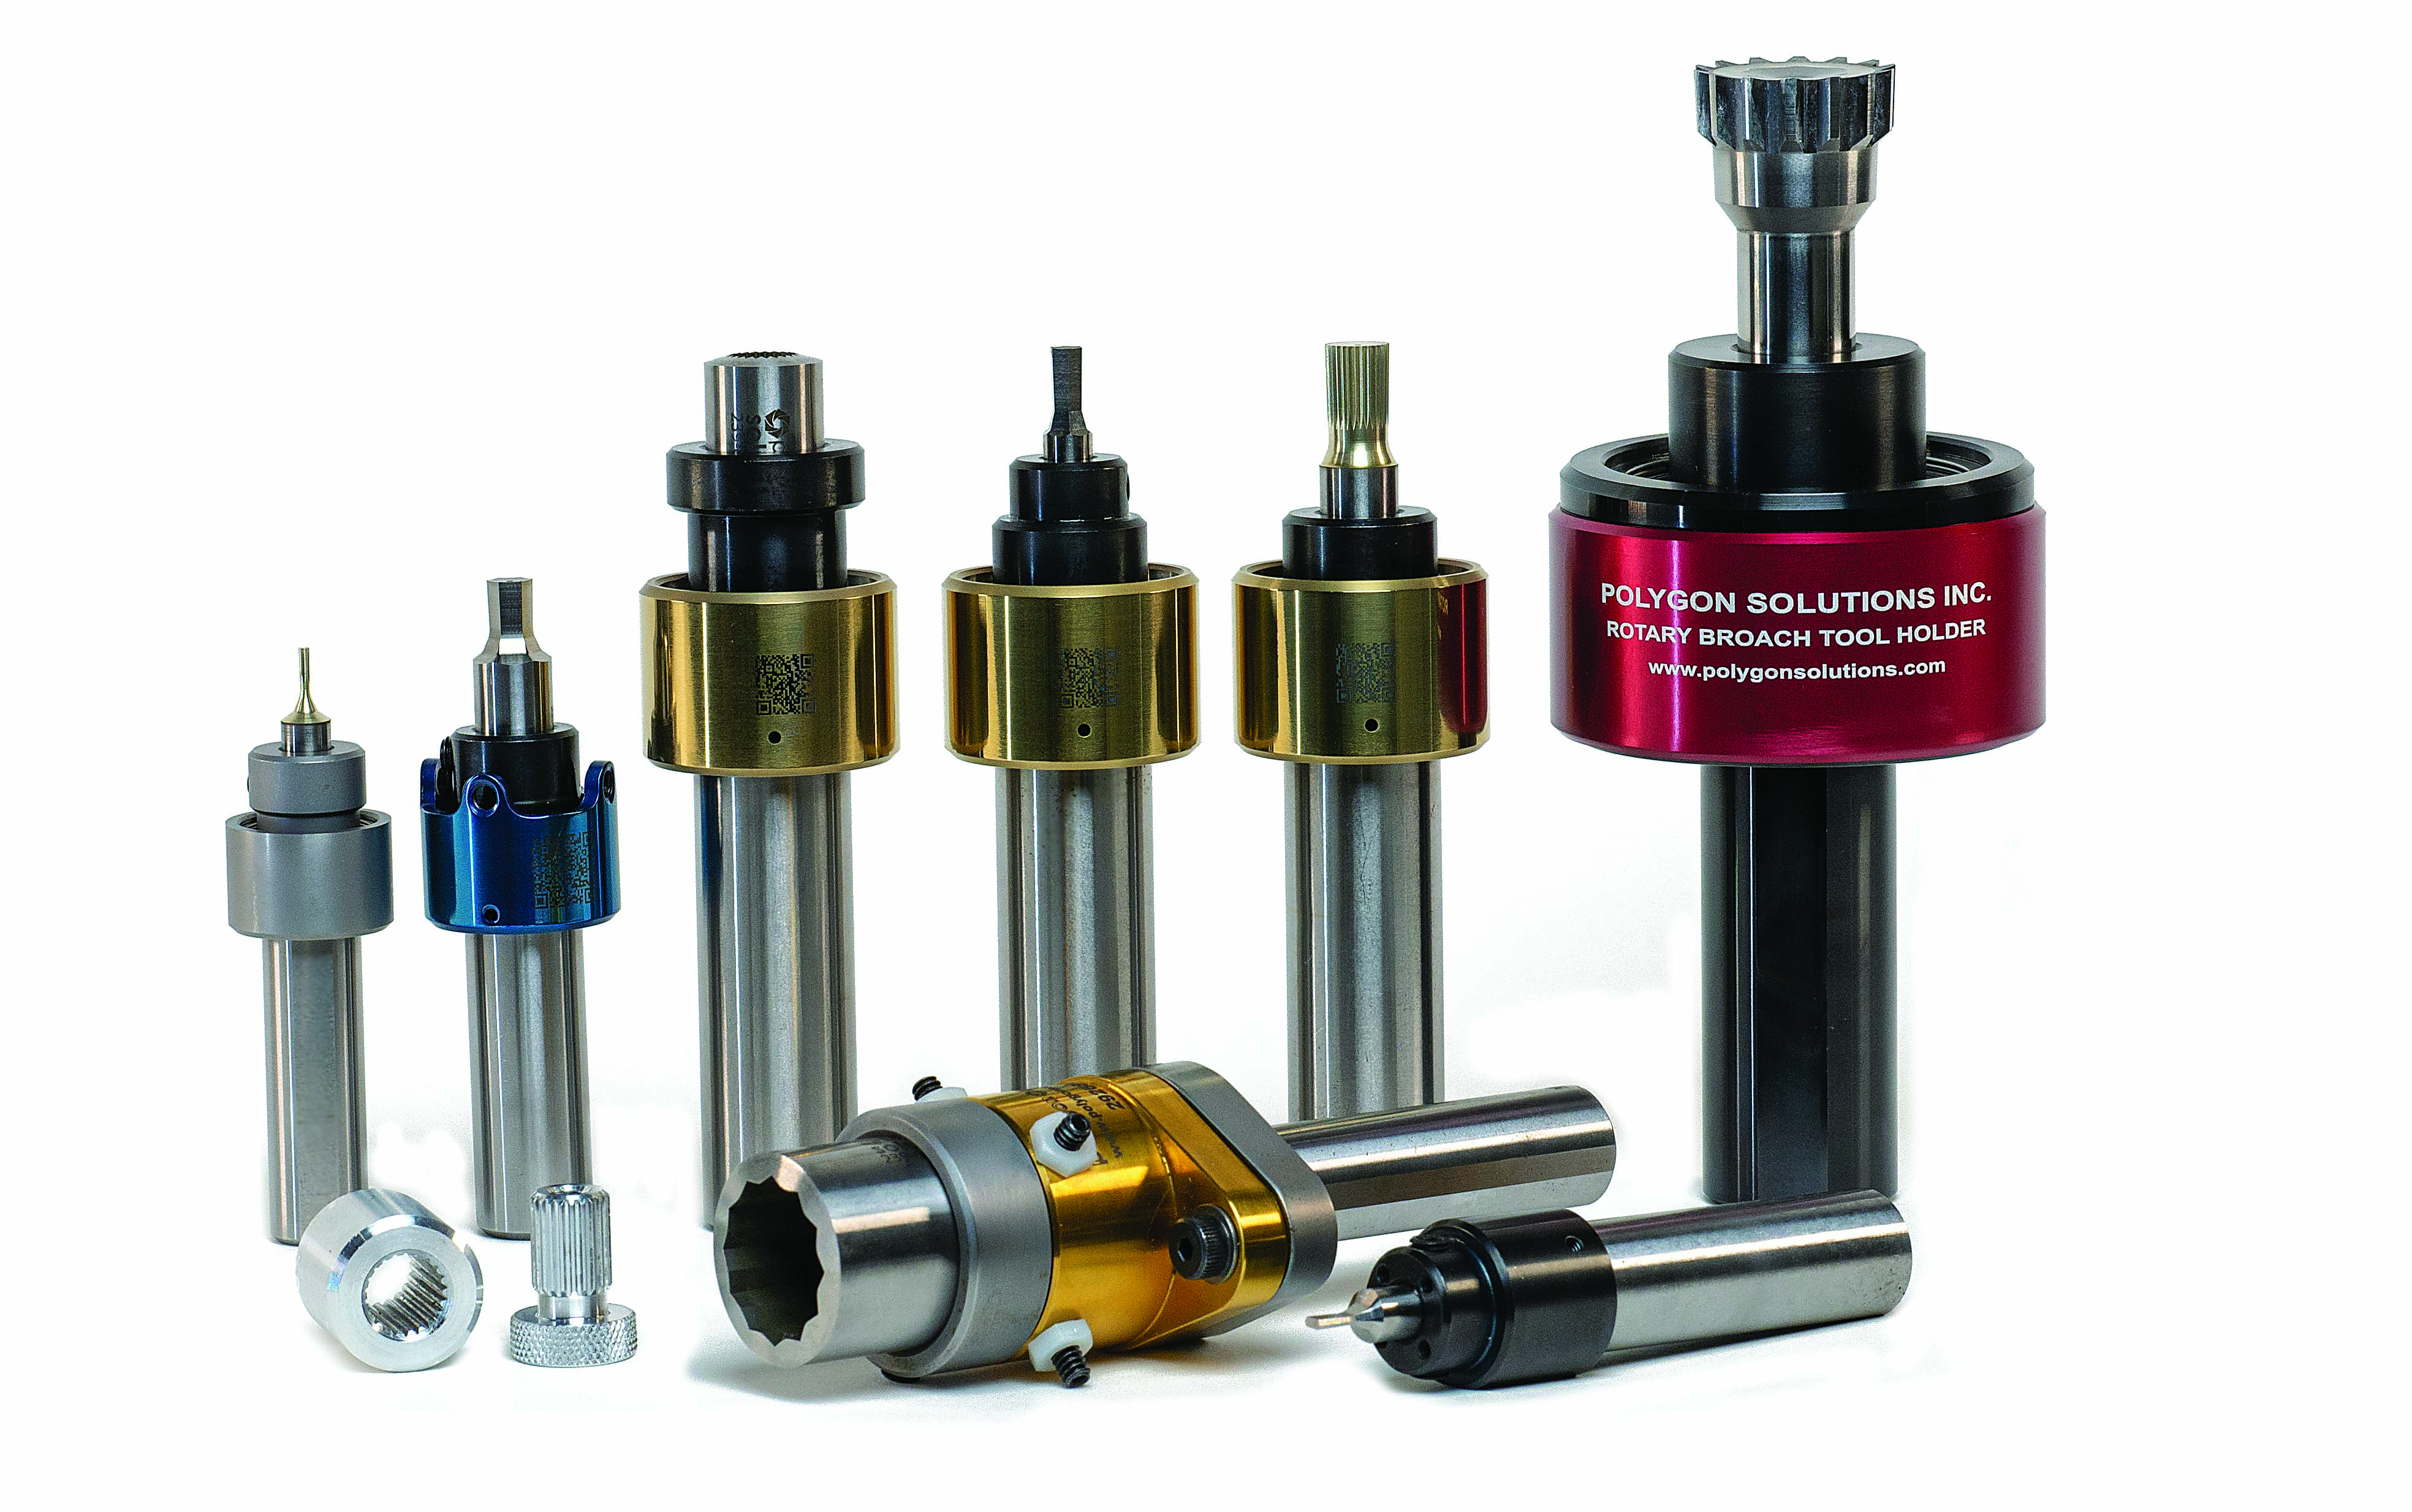 Polygon Solutions offers a variety of rotary broach toolholers.